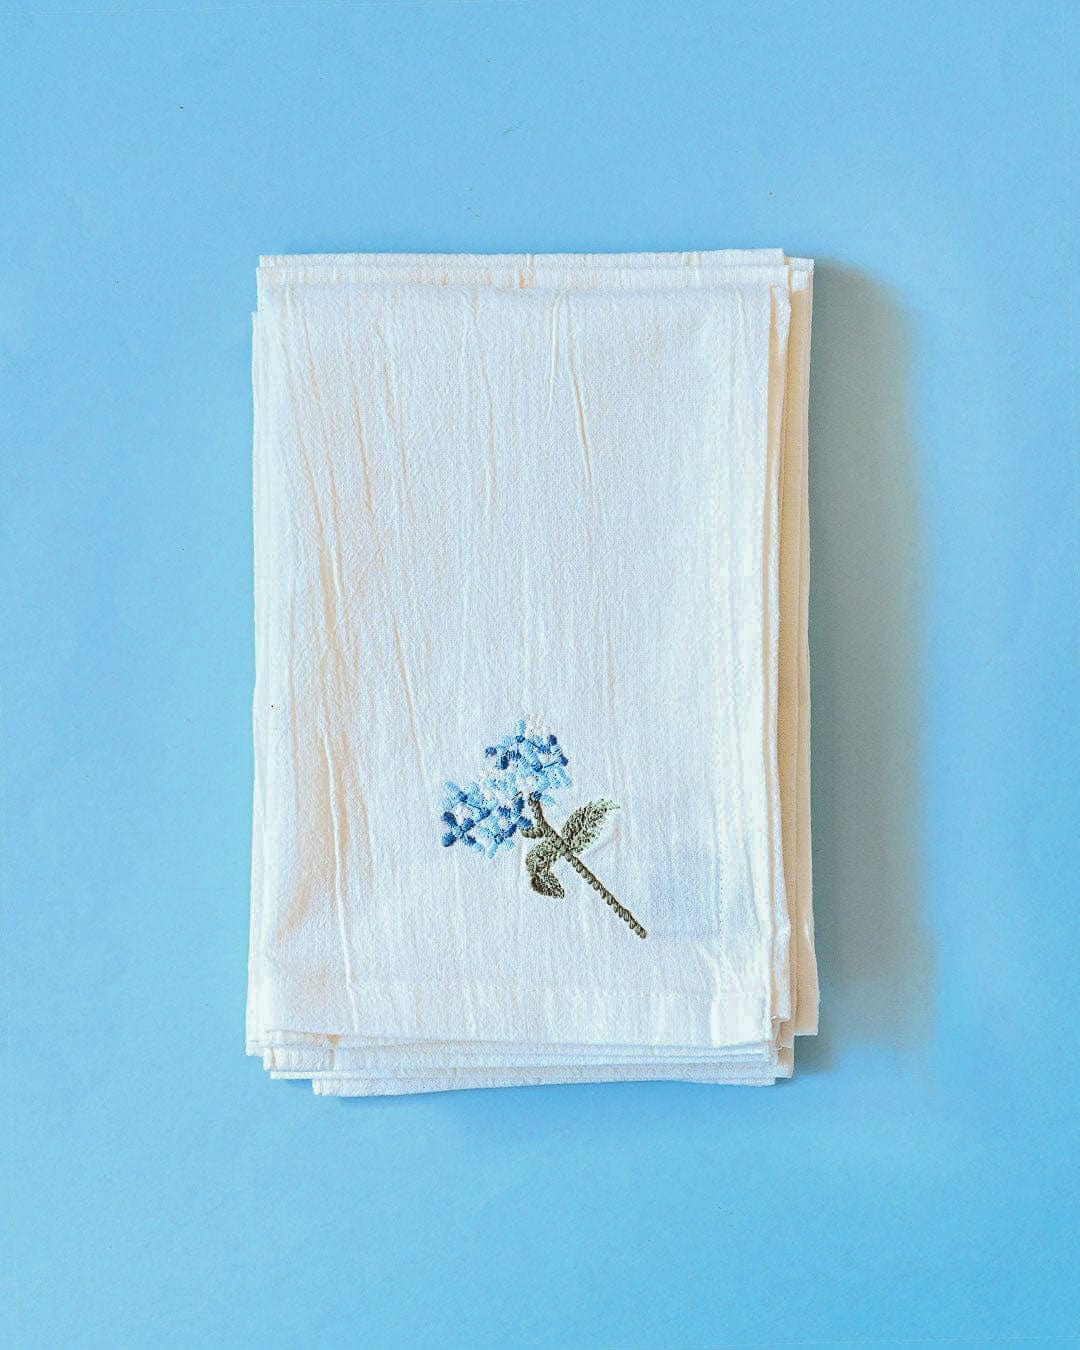 Escape in Blue Table Linen Collection - Set of 9